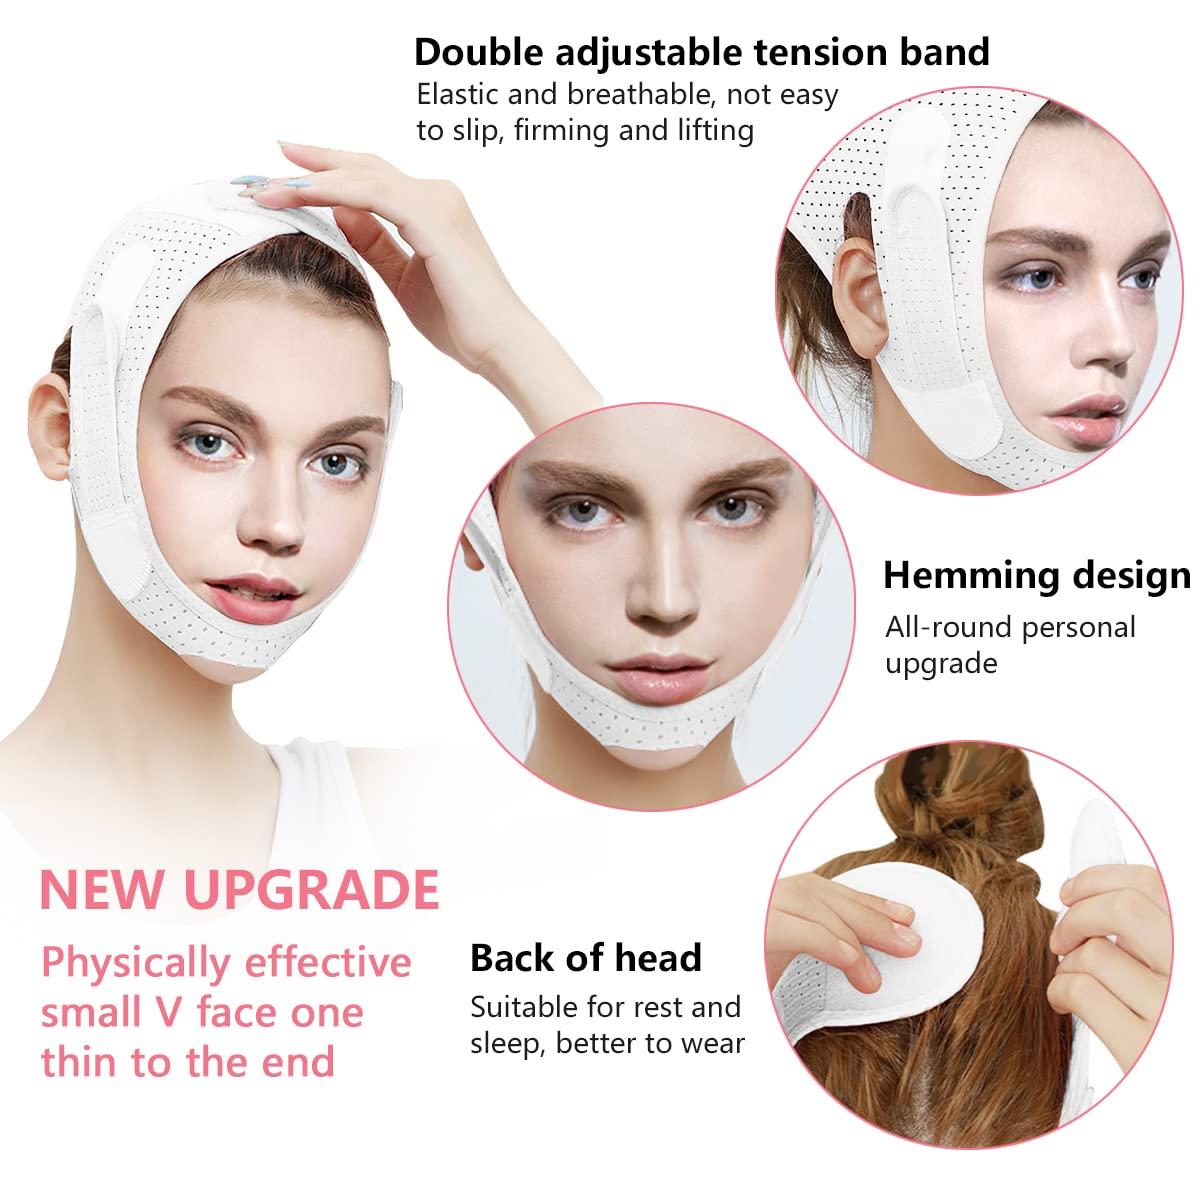 V Line Shaping Face Masks Reusable Face Slimming Strap Anti-Wrinkle Face  Mask Lifting Bandage for Double Chin and Saggy Face Skin (White) 2